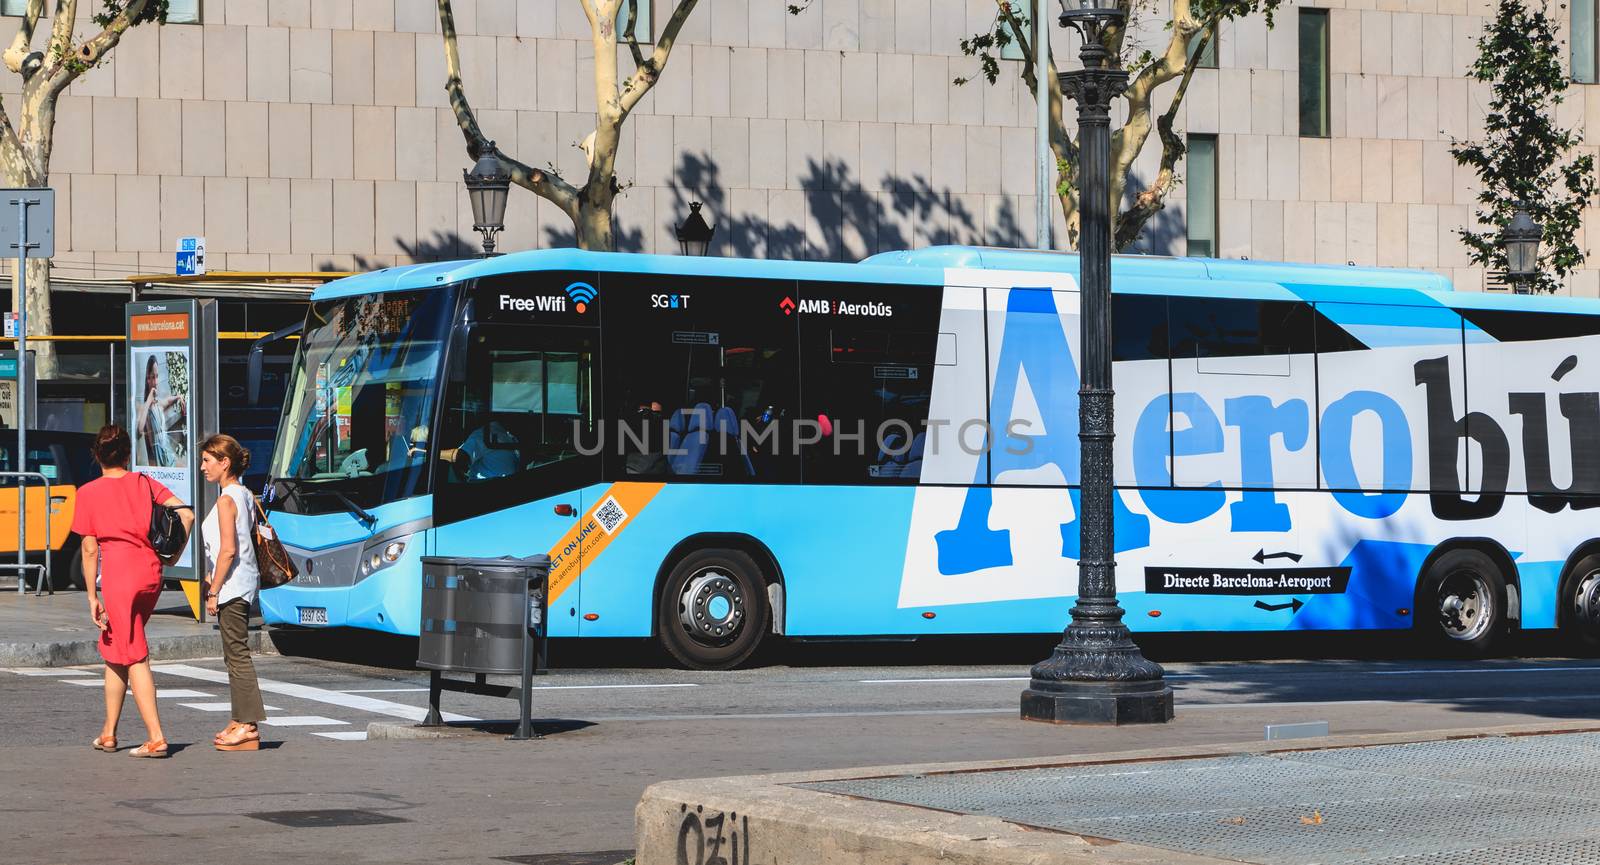 Aerobus airport shuttle buses parked at their terminal in Placa  by AtlanticEUROSTOXX